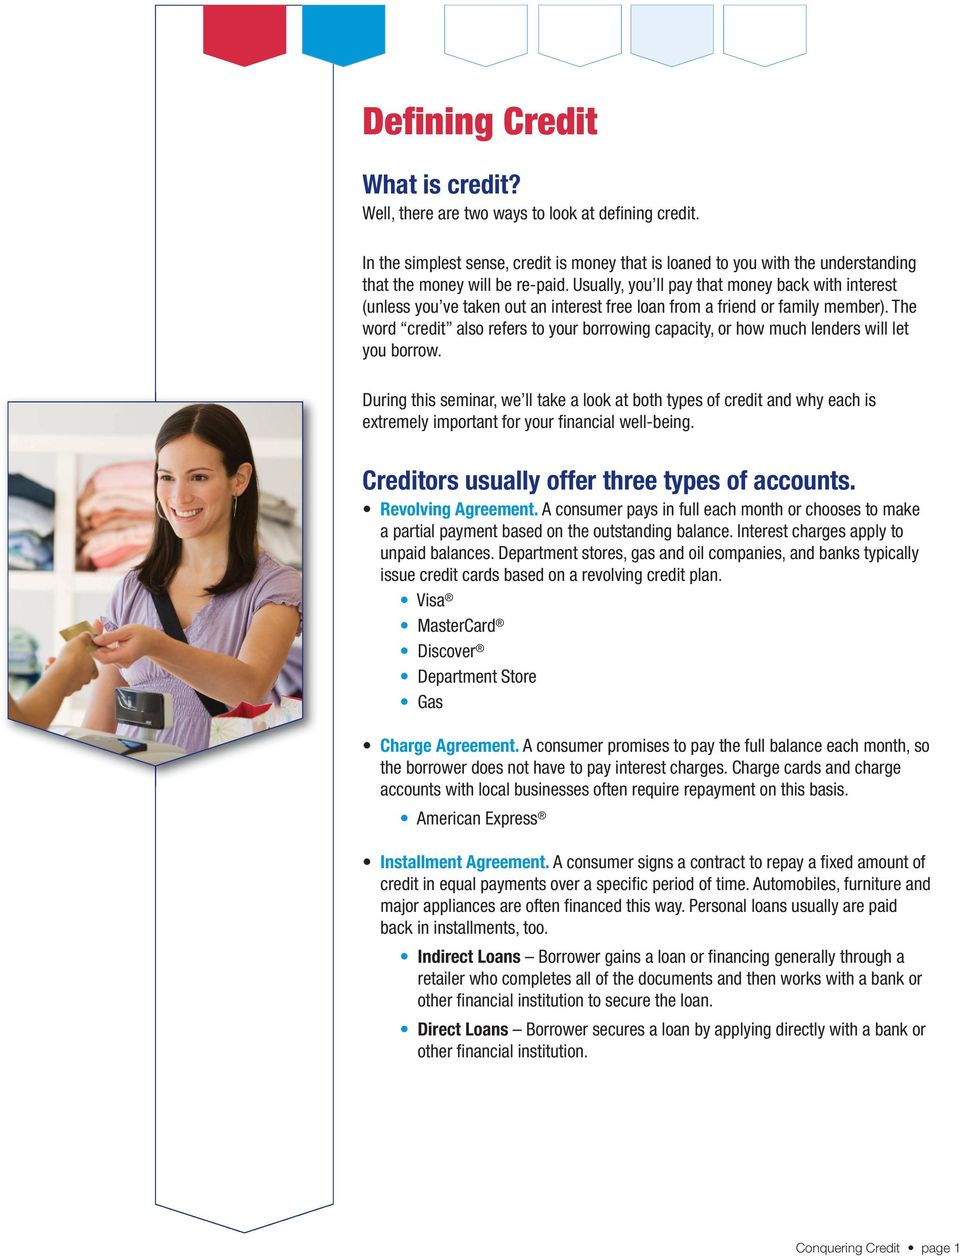 The word credit also refers to your borrowing capacity, or how much lenders will let you borrow.